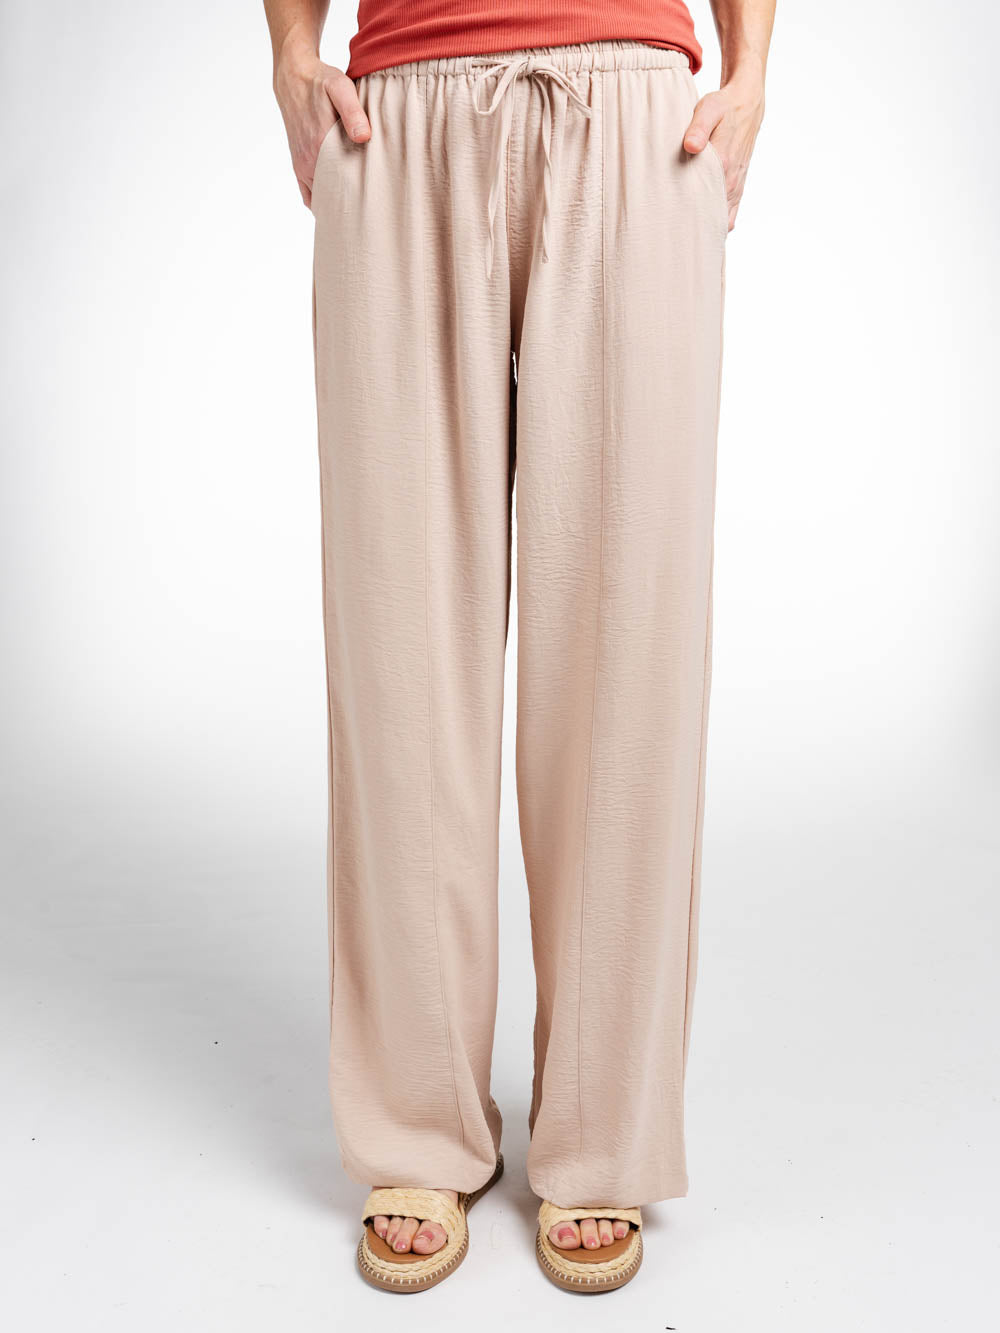 Resort Style Pants for Tall Ladies